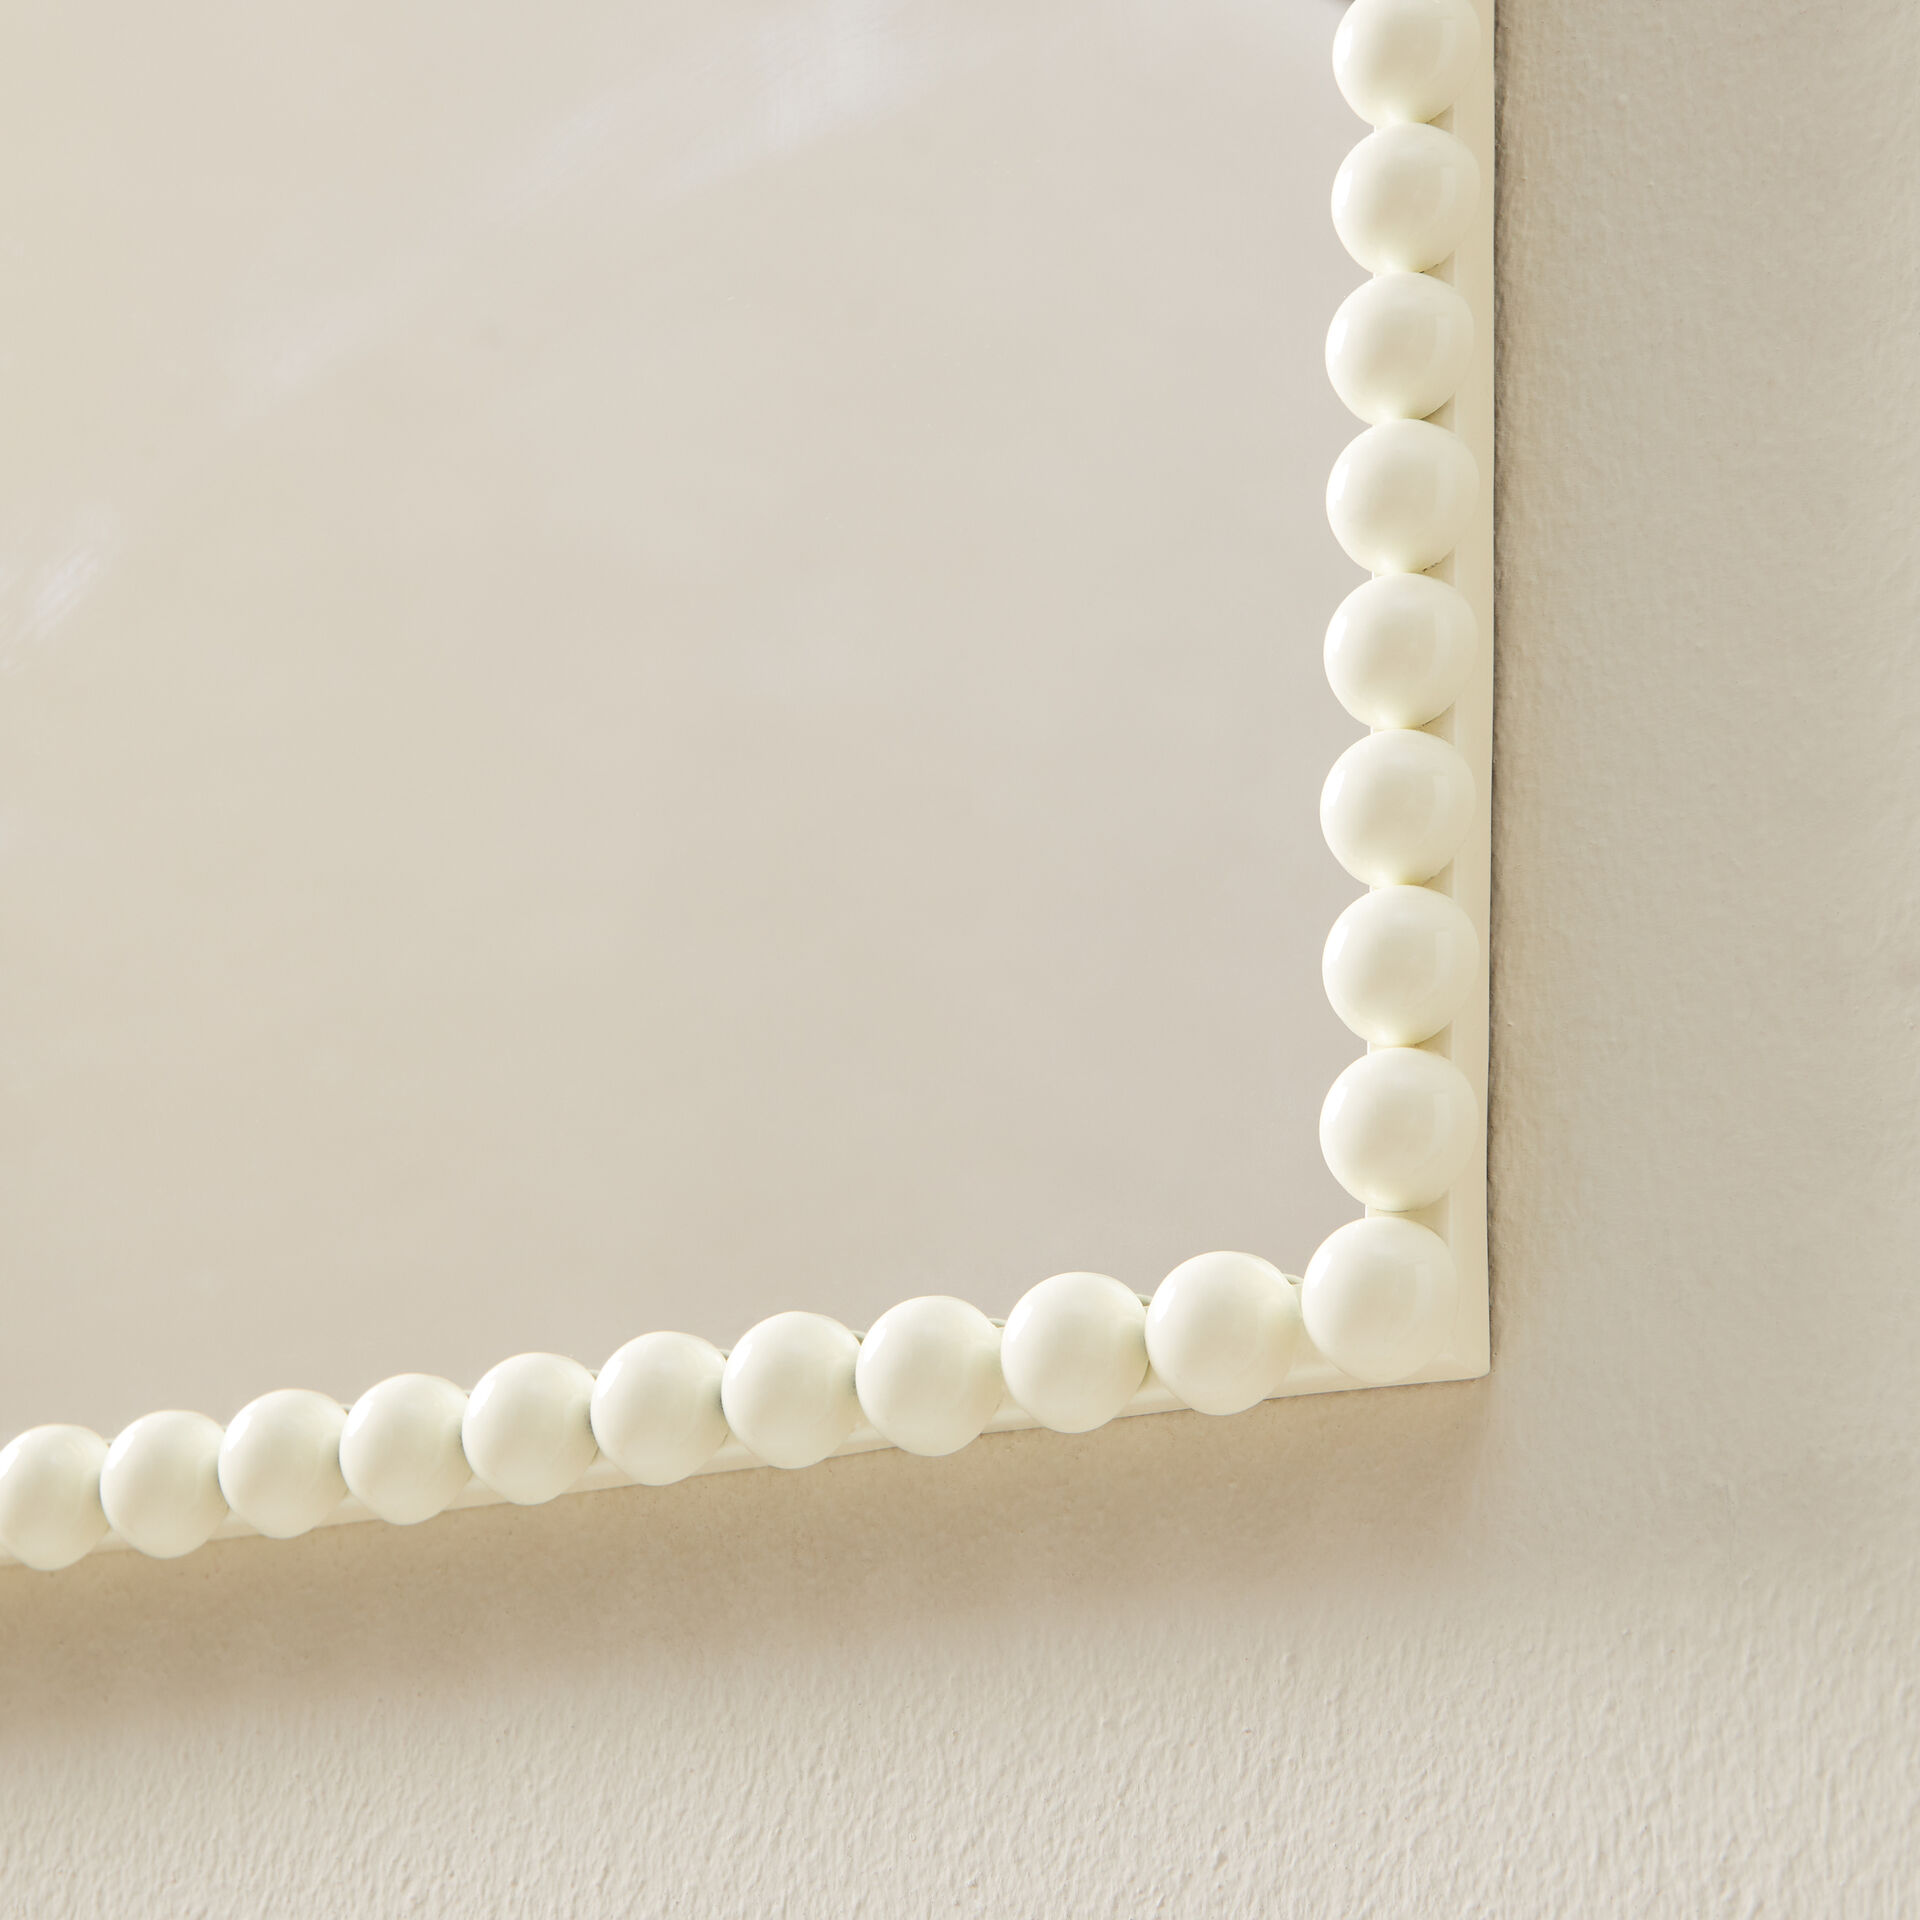 ${product-id}-Bobbin Mirror-Ivory-${view-type}